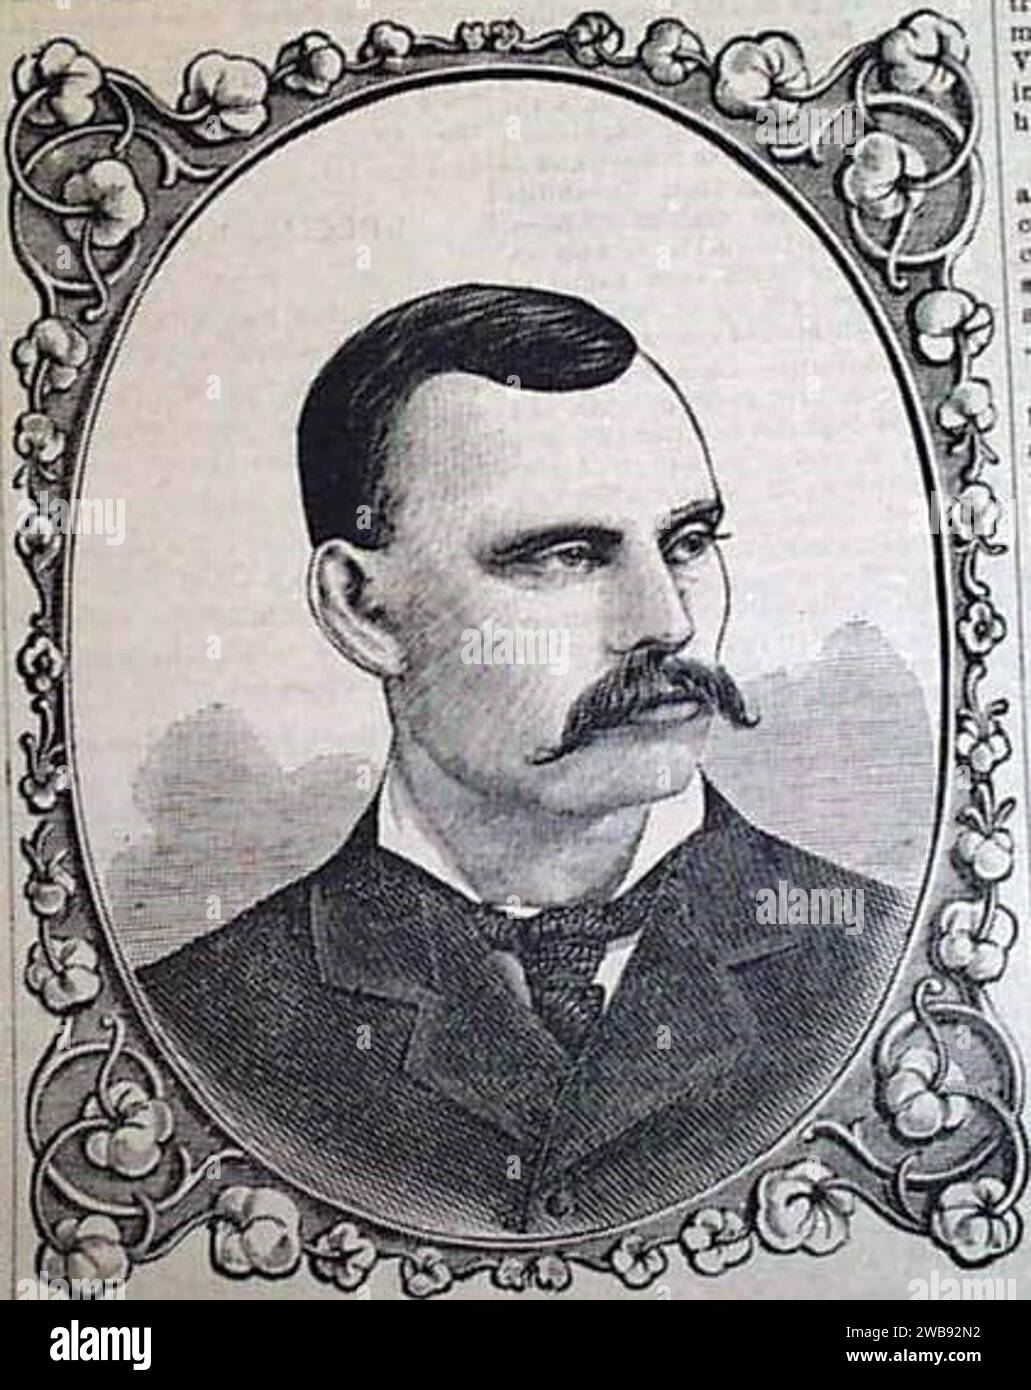 Joseph L. Quest (November 16, 1852 – November 14, 1924) was an American professional baseball player from 1871 to 1892. Stock Photo